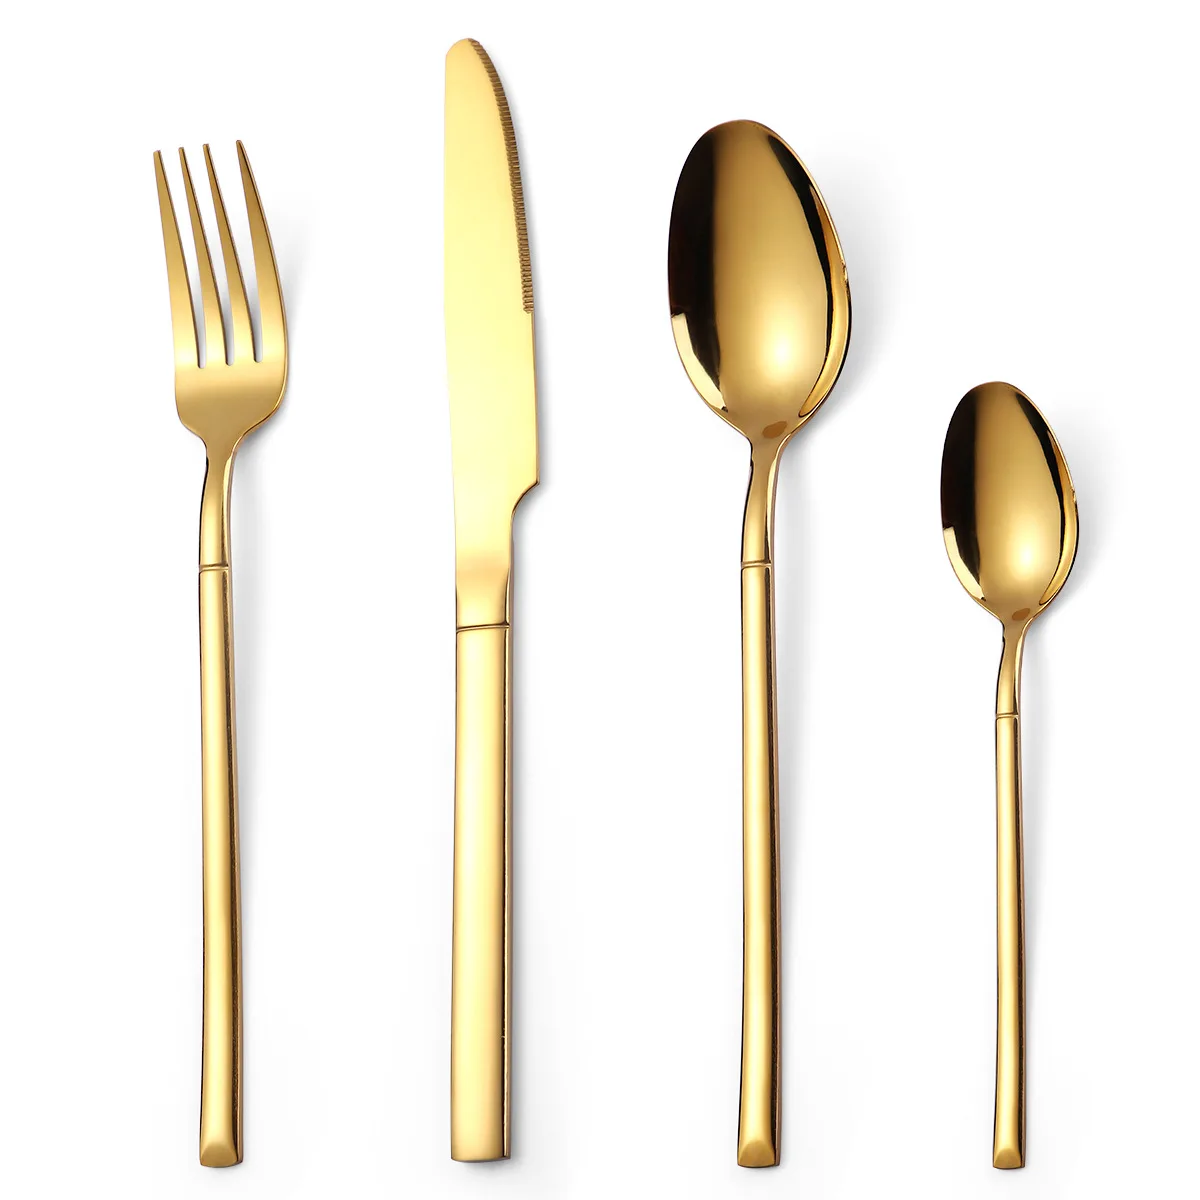 

Gold Silverware Set Stainless Steel Flatware Set Spoons Forks Knives Cutlery Utensils Set Service for 4 Mirror Polished